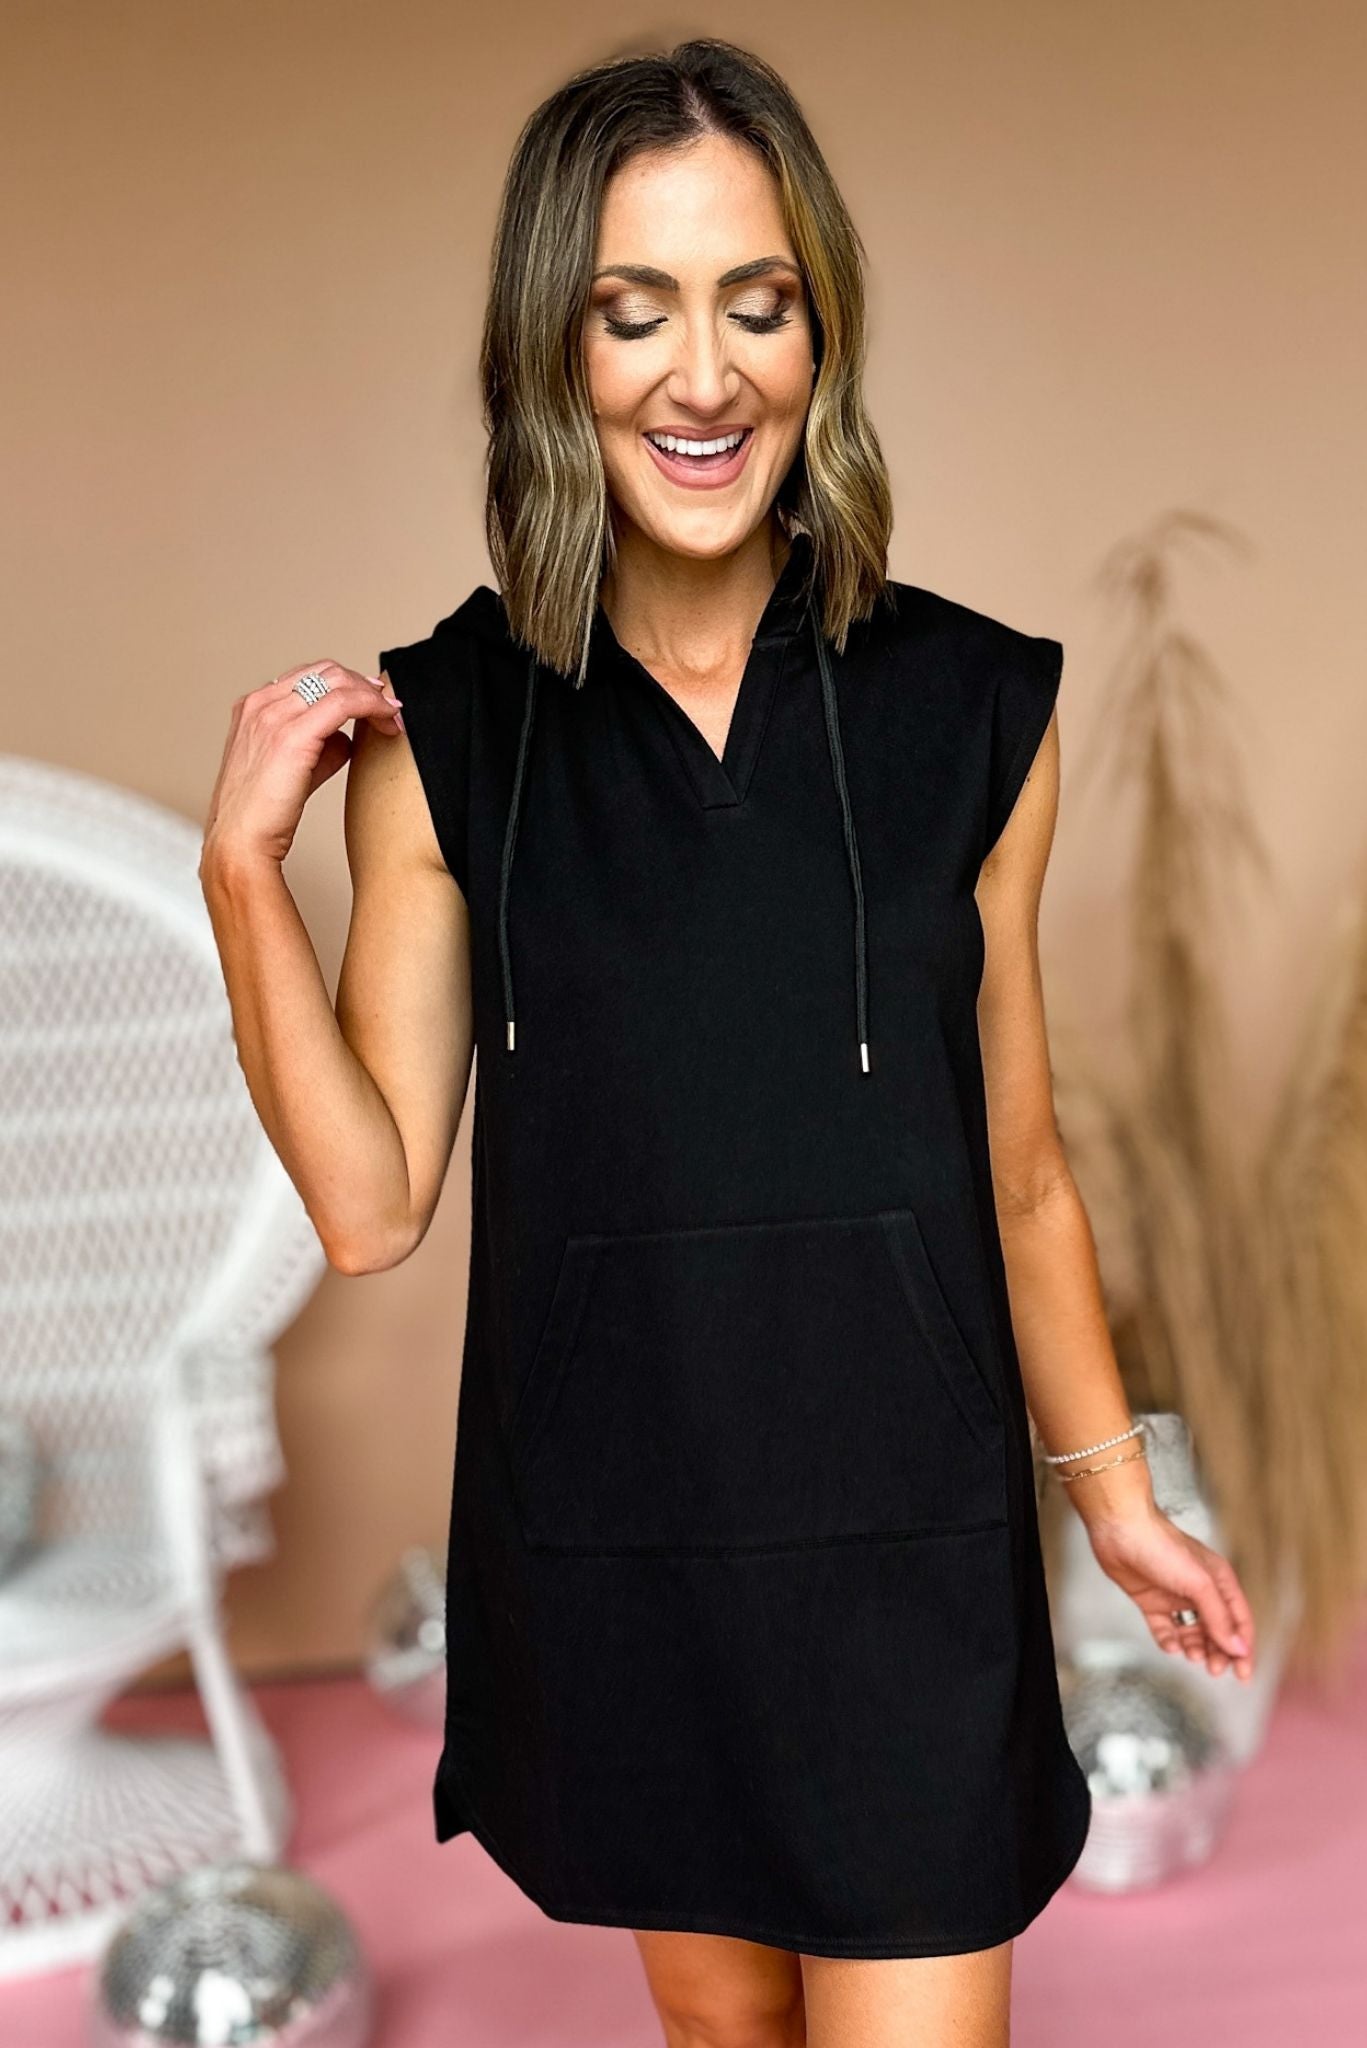 SSYS black Sleeveless Hooded Sweatshirt Dress, everyday wear, hood, front pocket, mom style, v neck, new arrival, shop style your senses by mallory fitzsimmons